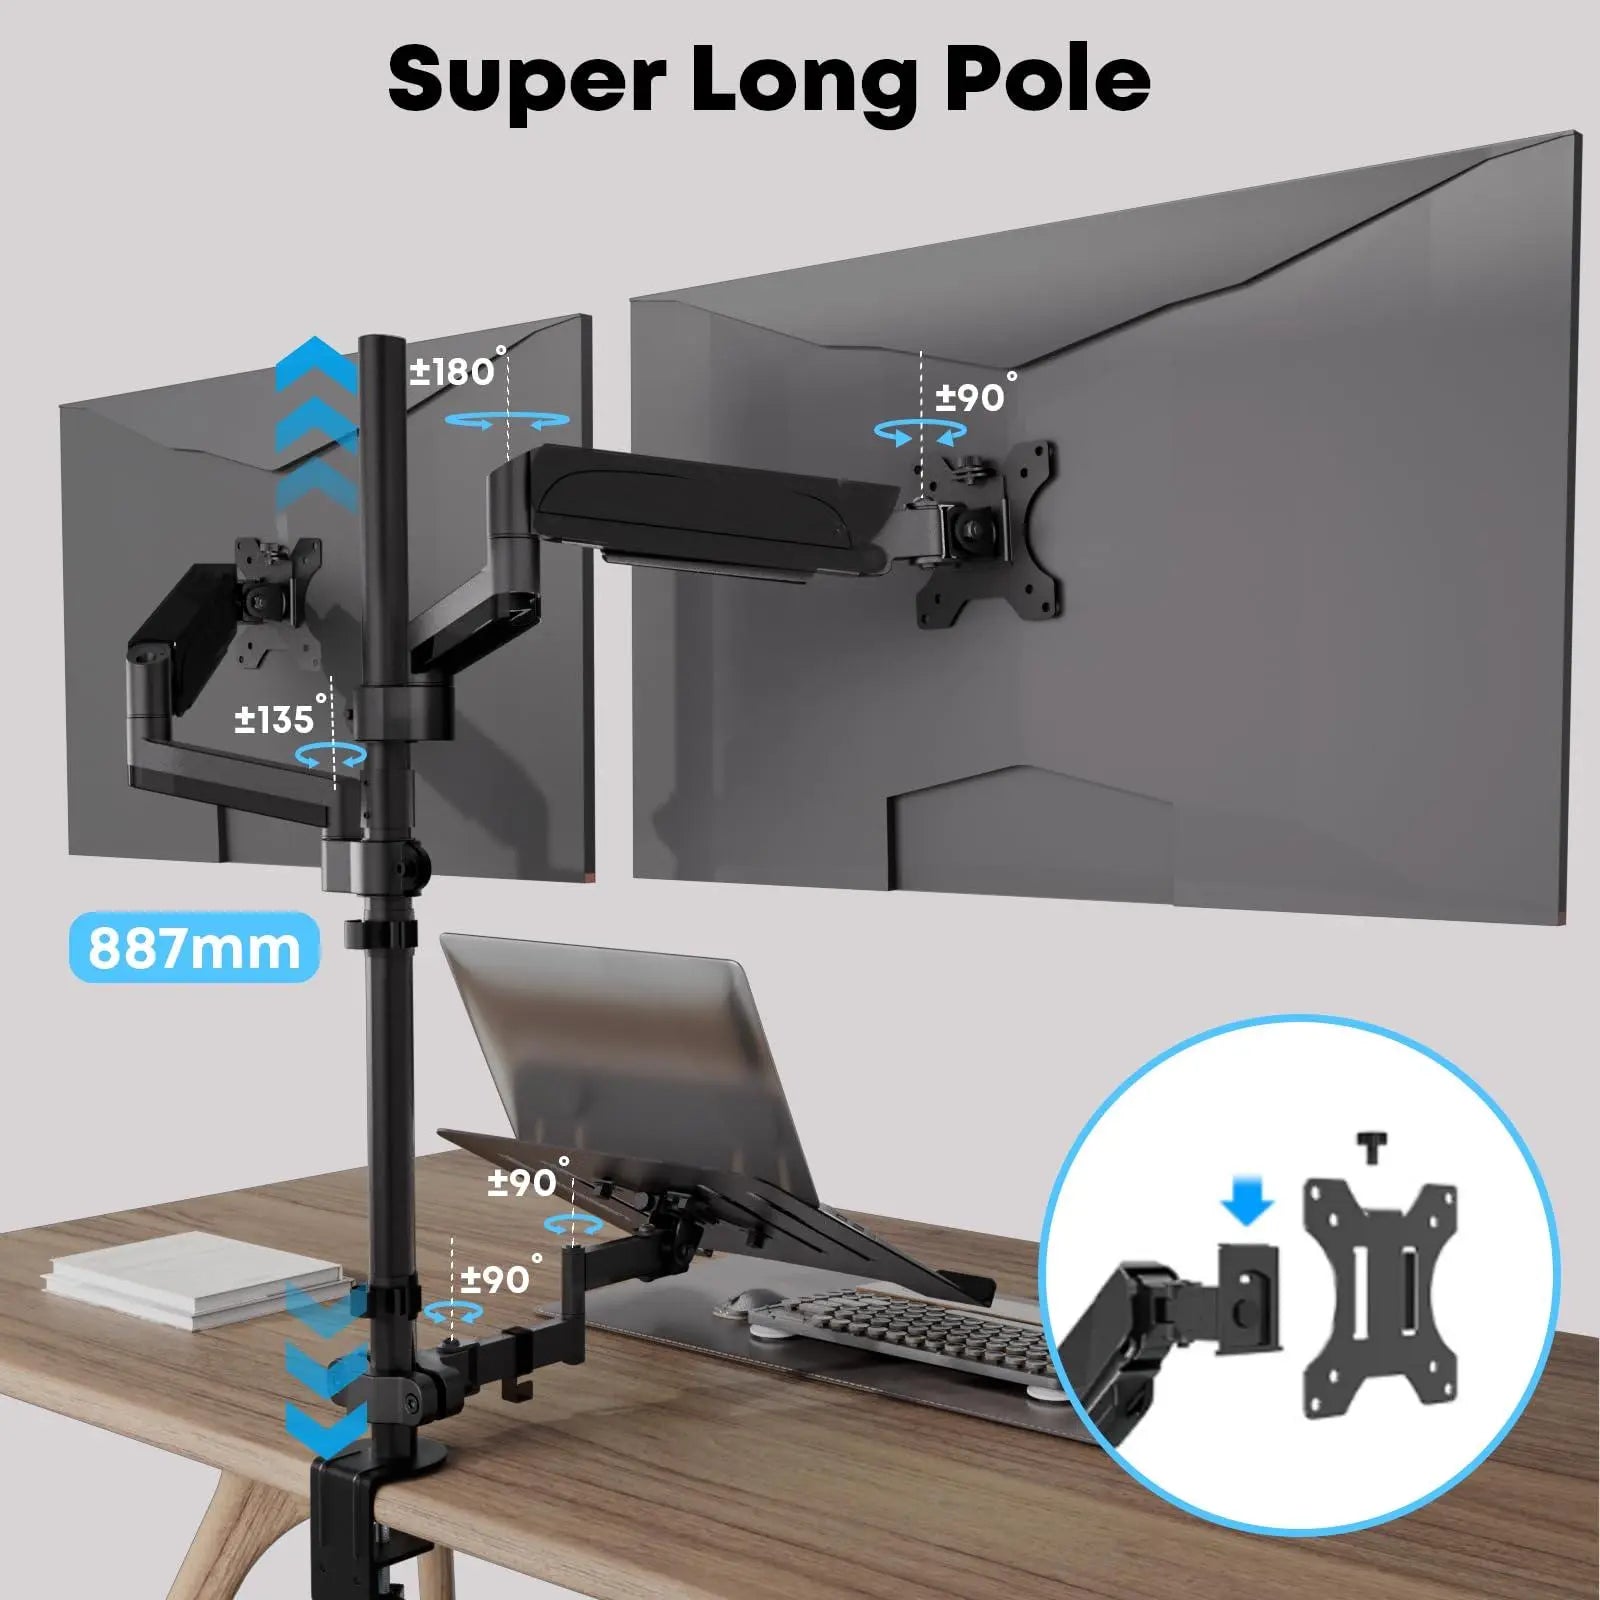 PUTORSEN monitor mount 2 monitors with laptop arm for 17-32 inch screen up to 17" notebook, tiltable swivelling monitor laptop mount desk with clamp PUTORSEN